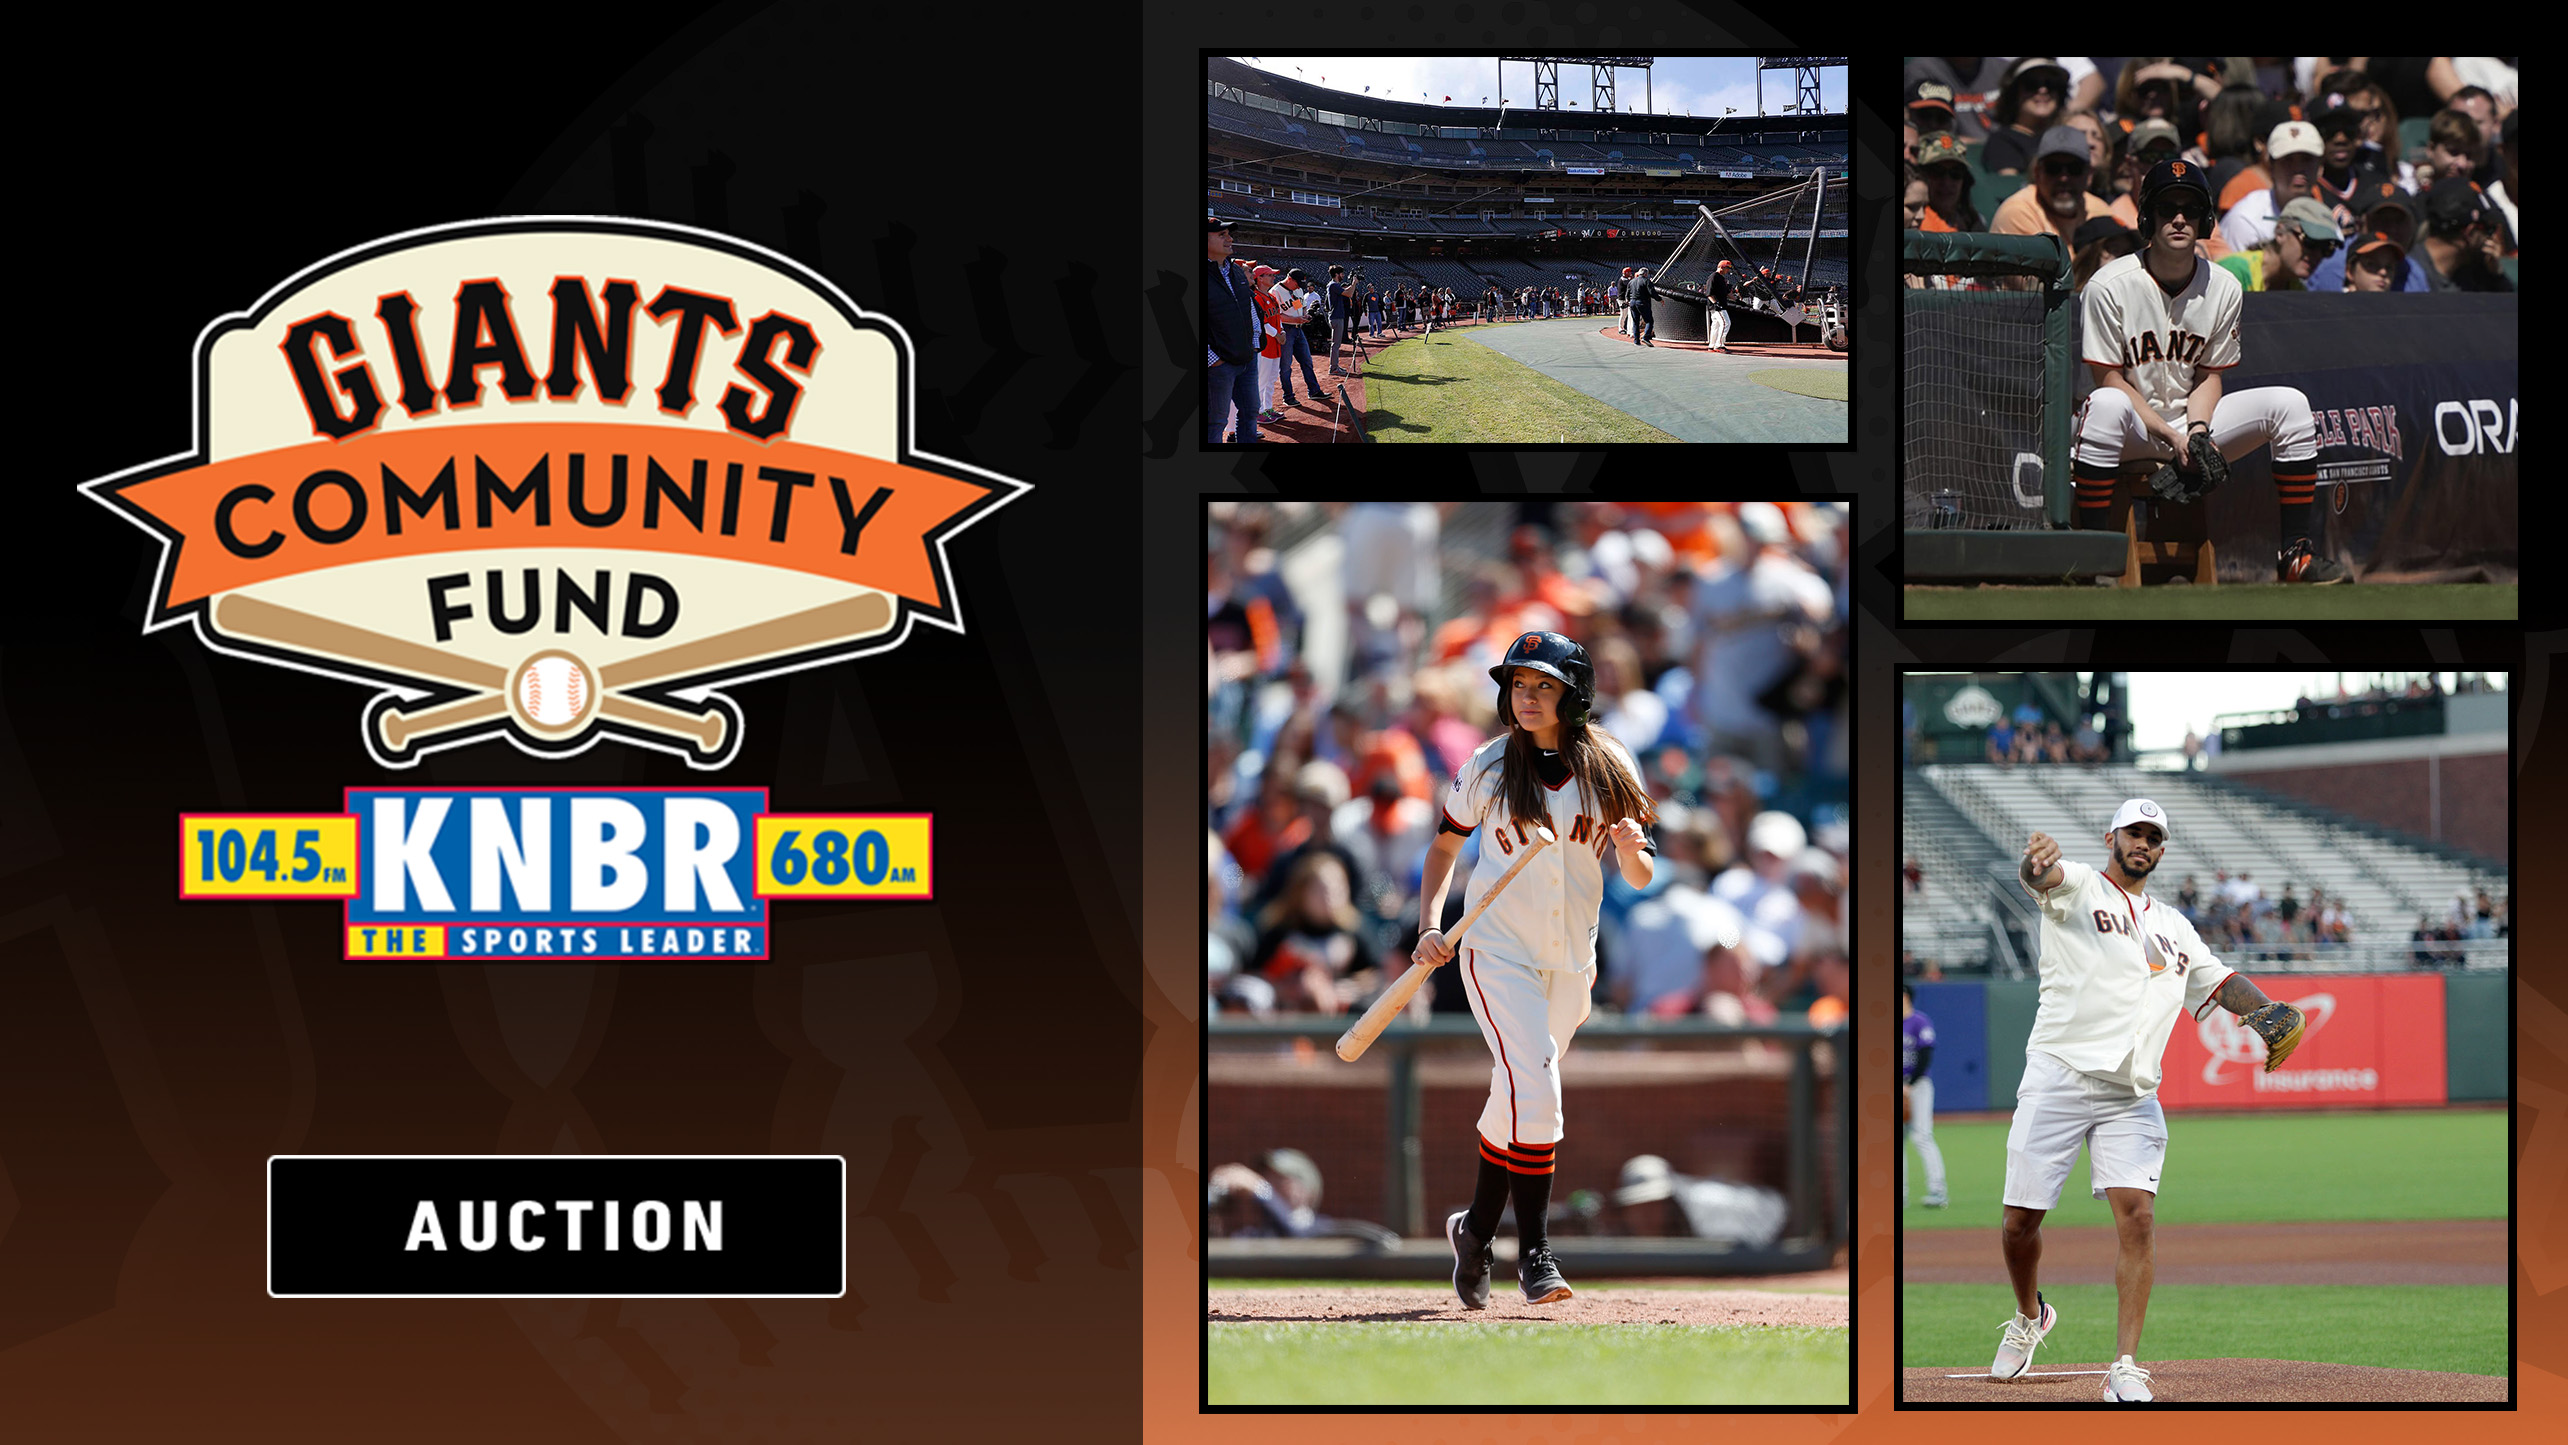 The official auction site of Giants Auctions